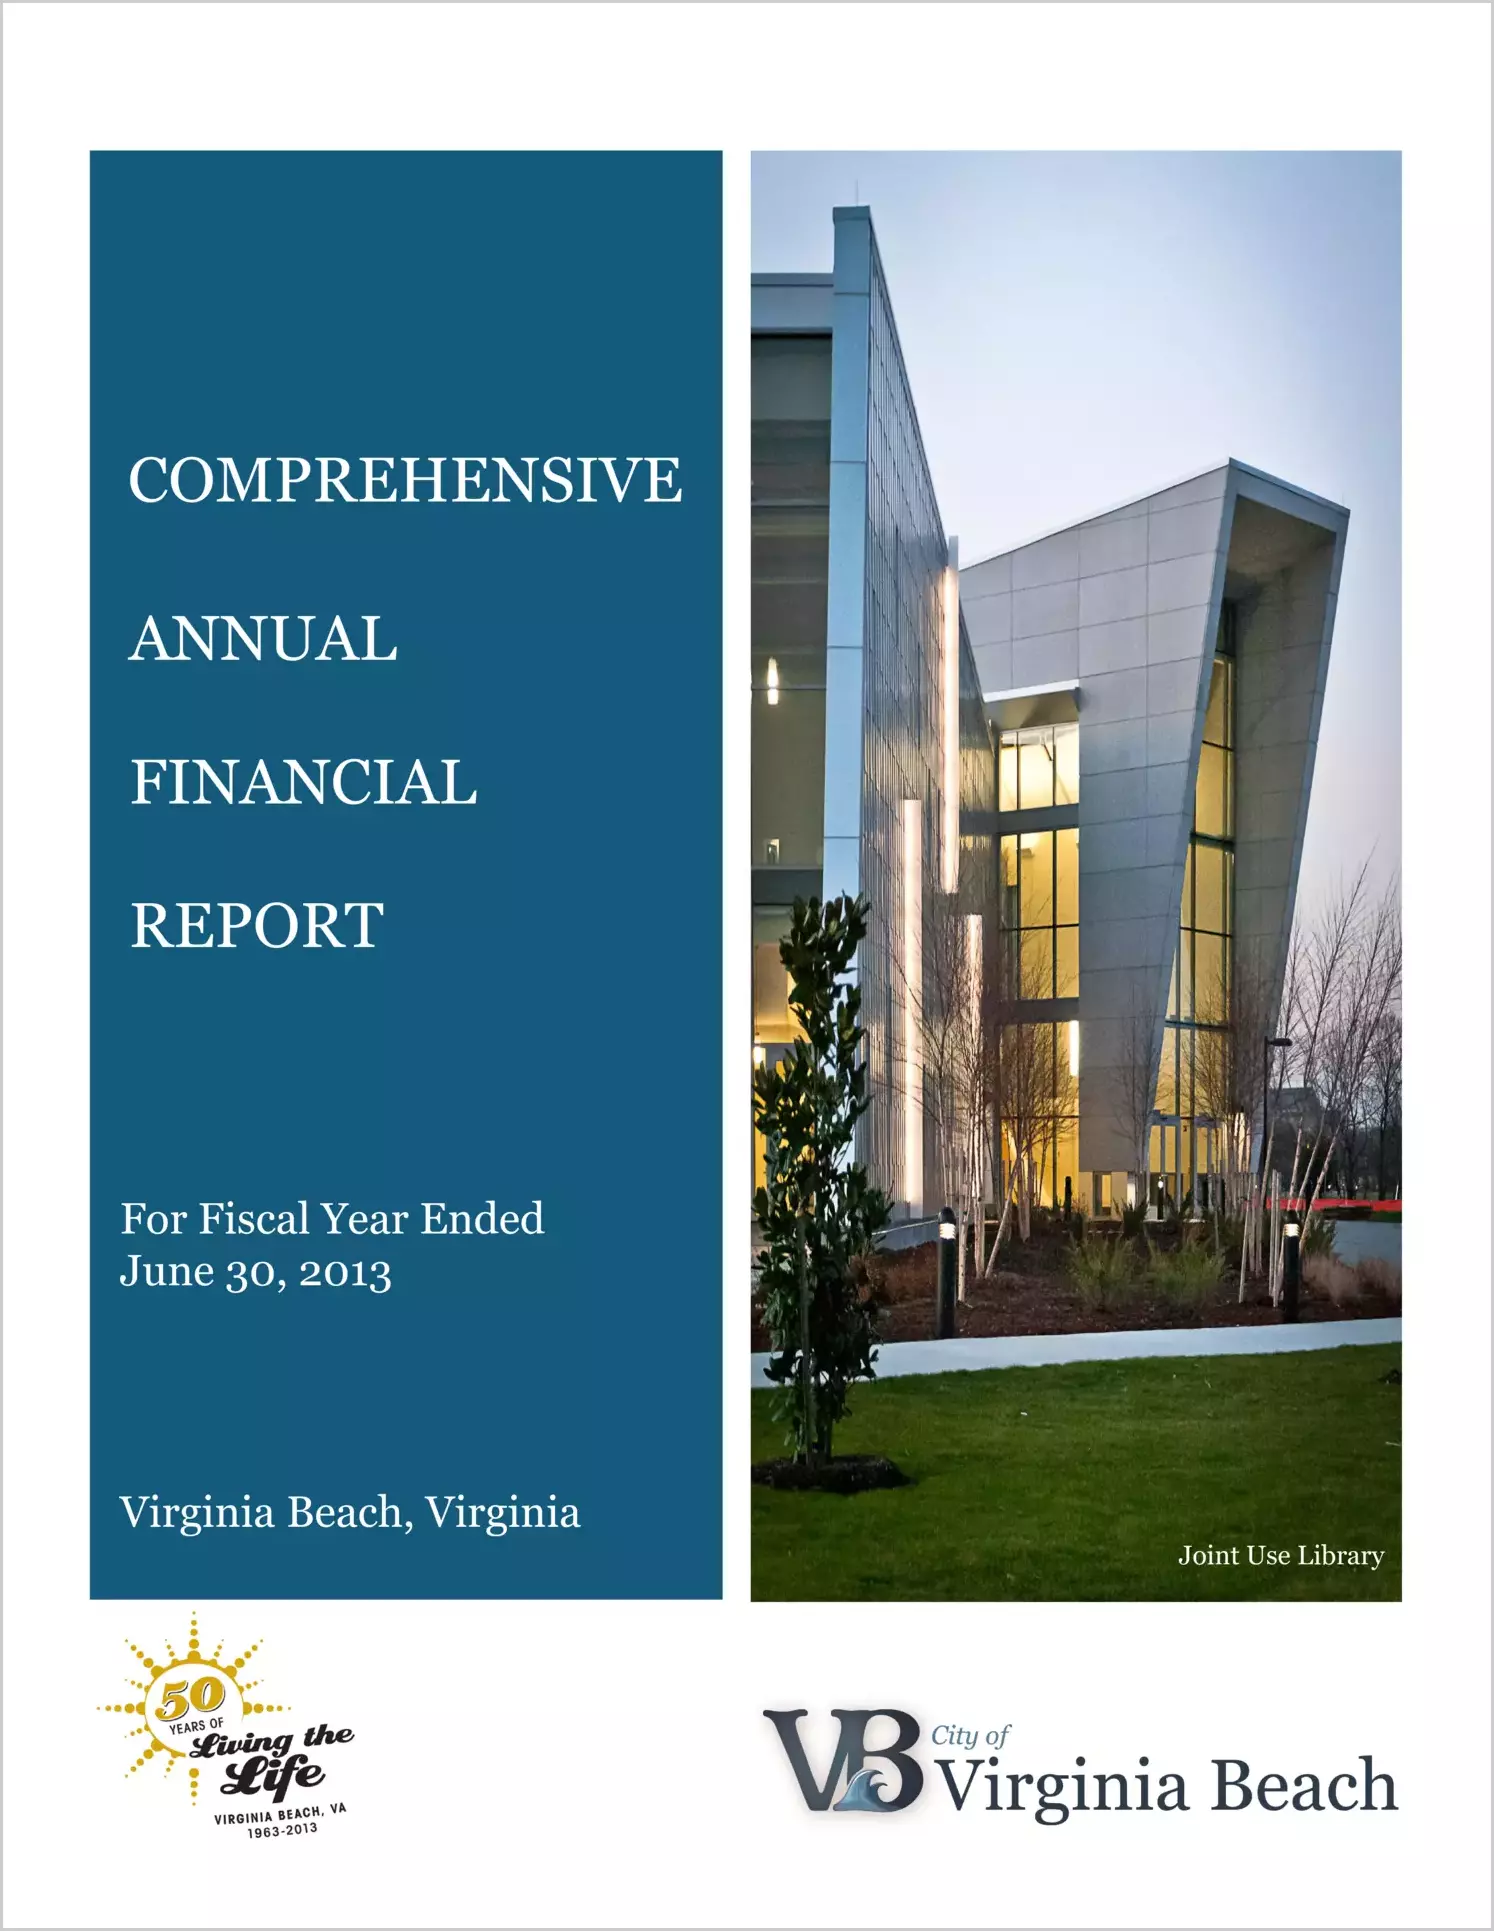 2013 Annual Financial Report for City of Virginia Beach